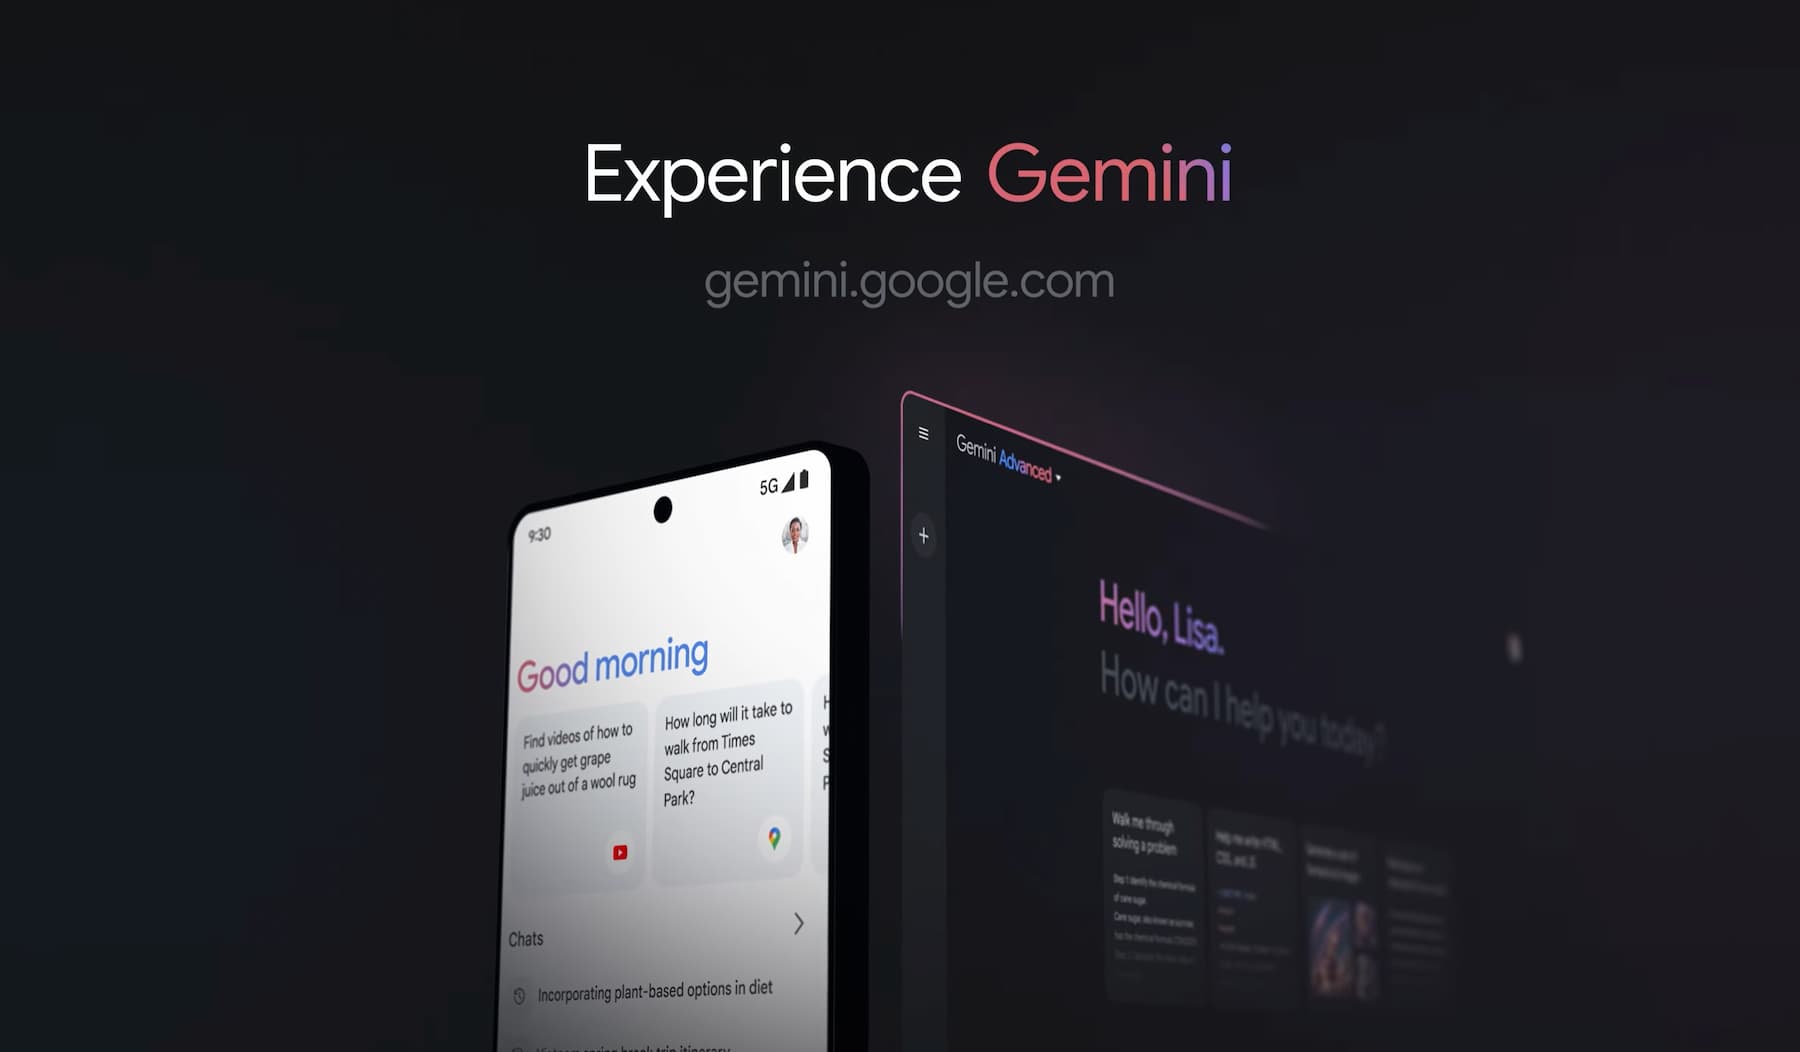 [Download] Google Gemini APK now works in all countries, also available on the App Store (formerly called Bard)